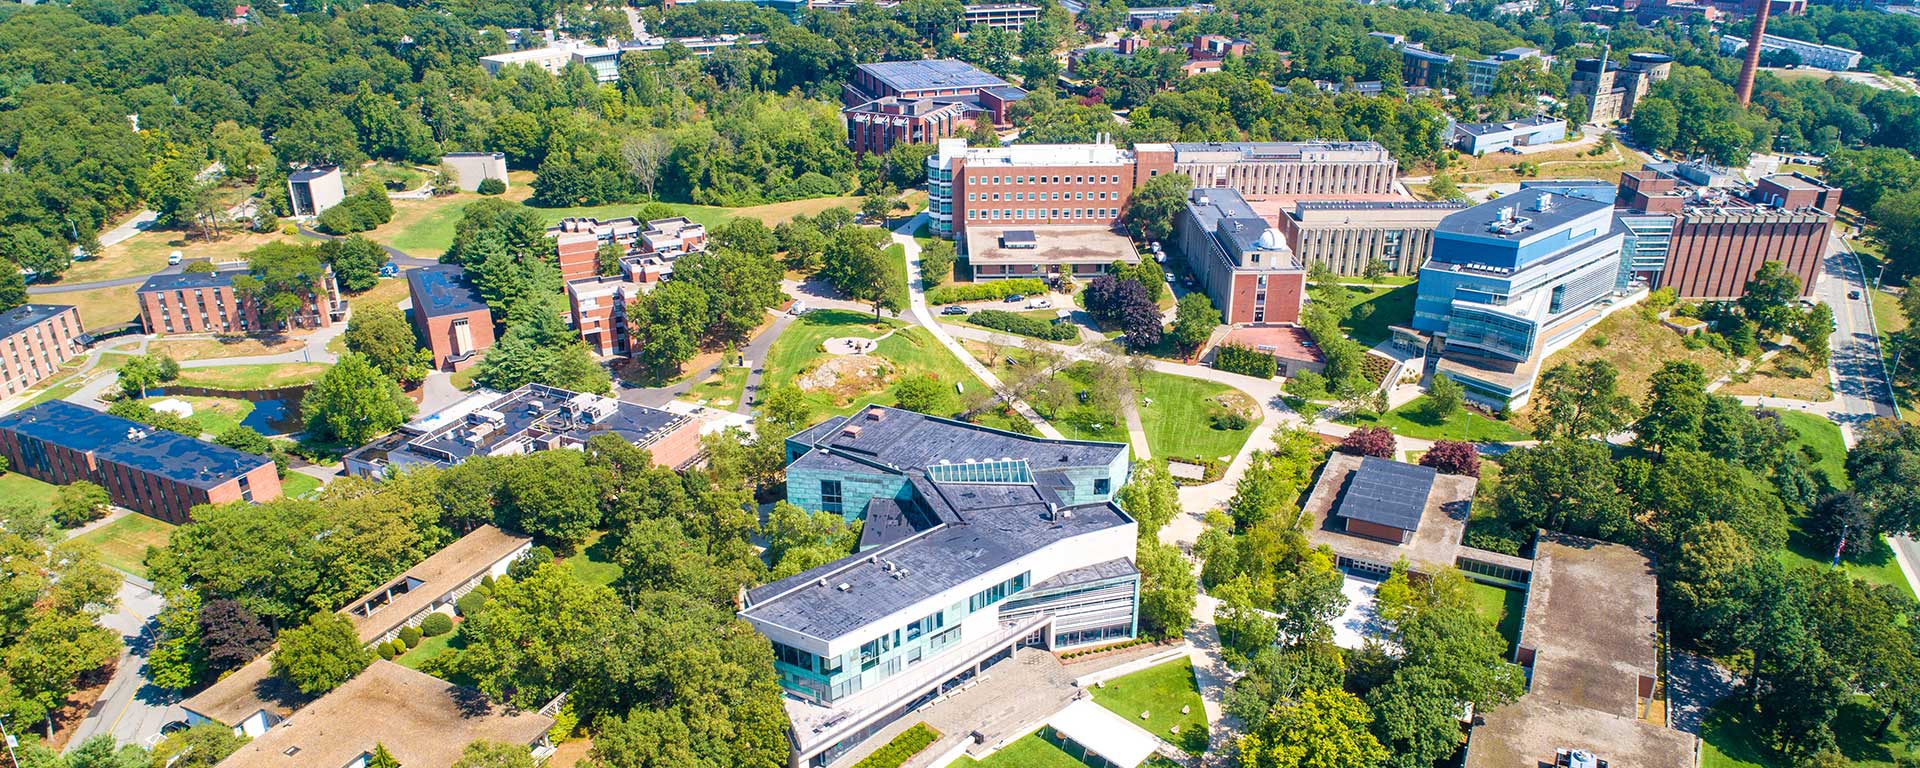 Aerial view of the Brandeis campus in the summer